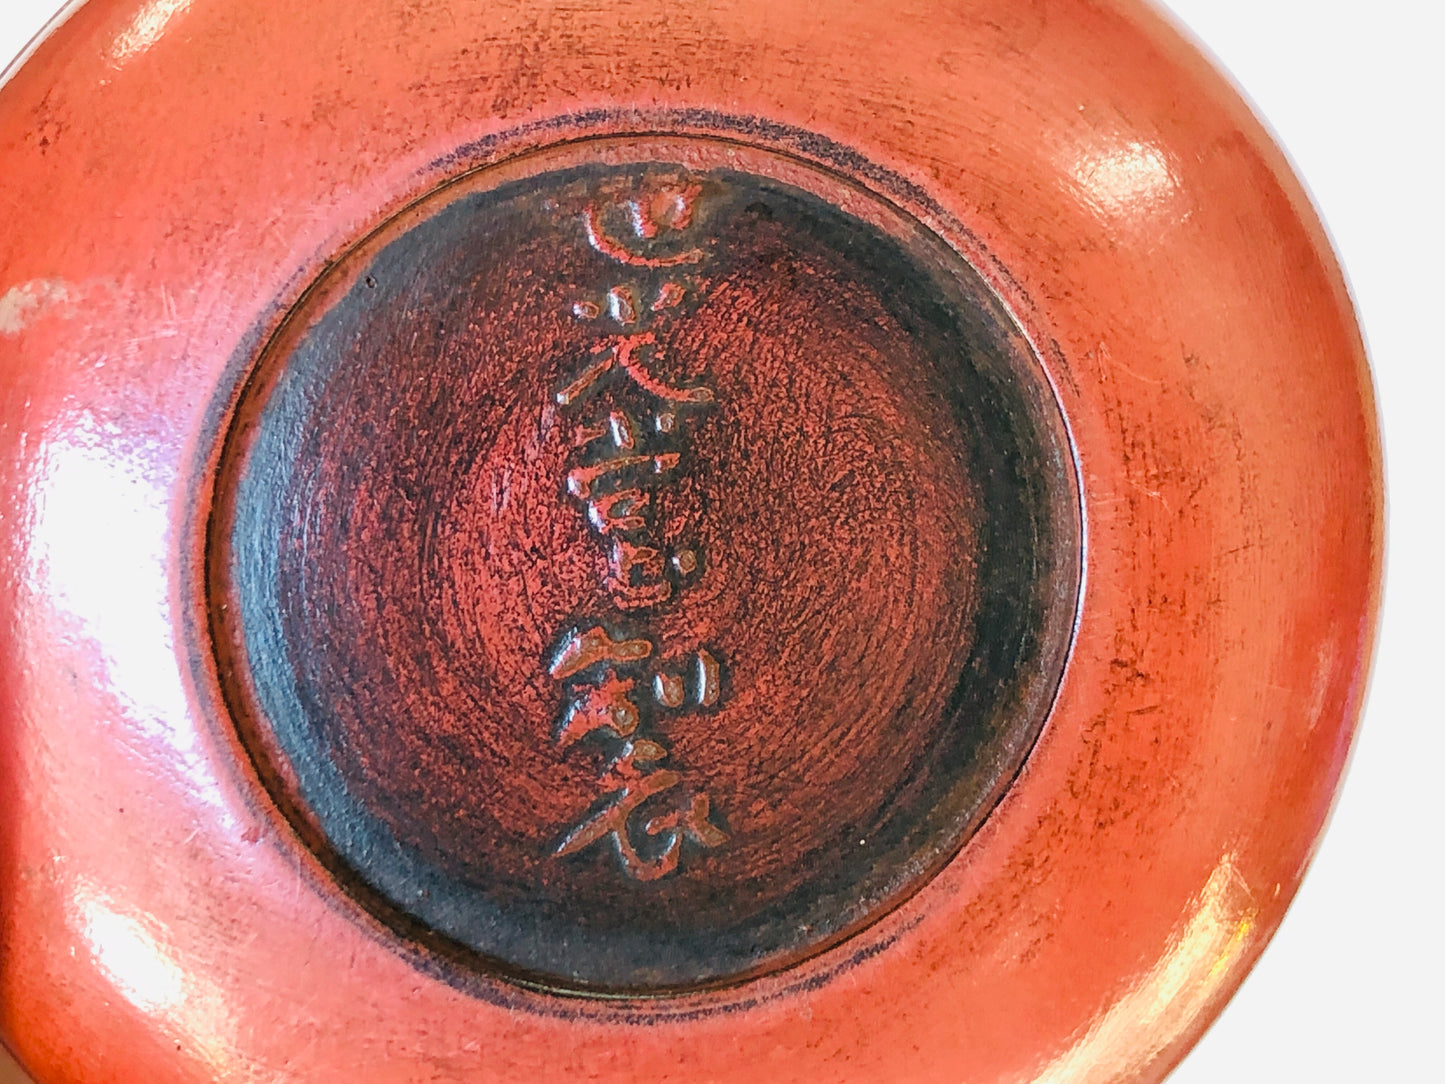 Y5023 BOX Vermillion Insence container dragon signed repaint Japan antique aroma